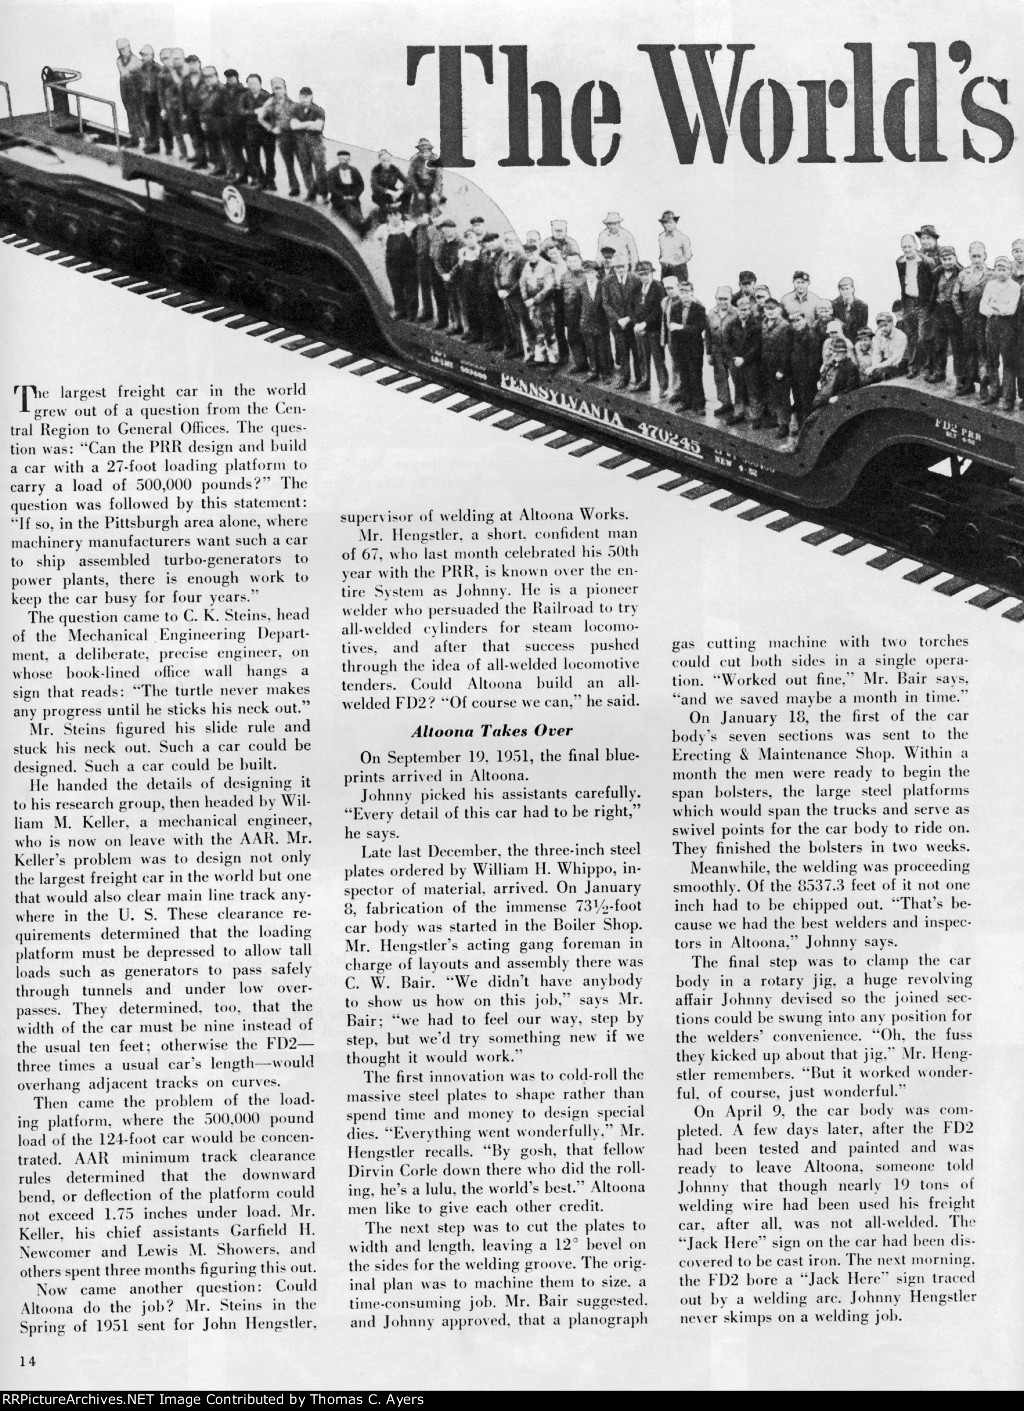 "Worlds Largest Freight Car," Page 14, 1952